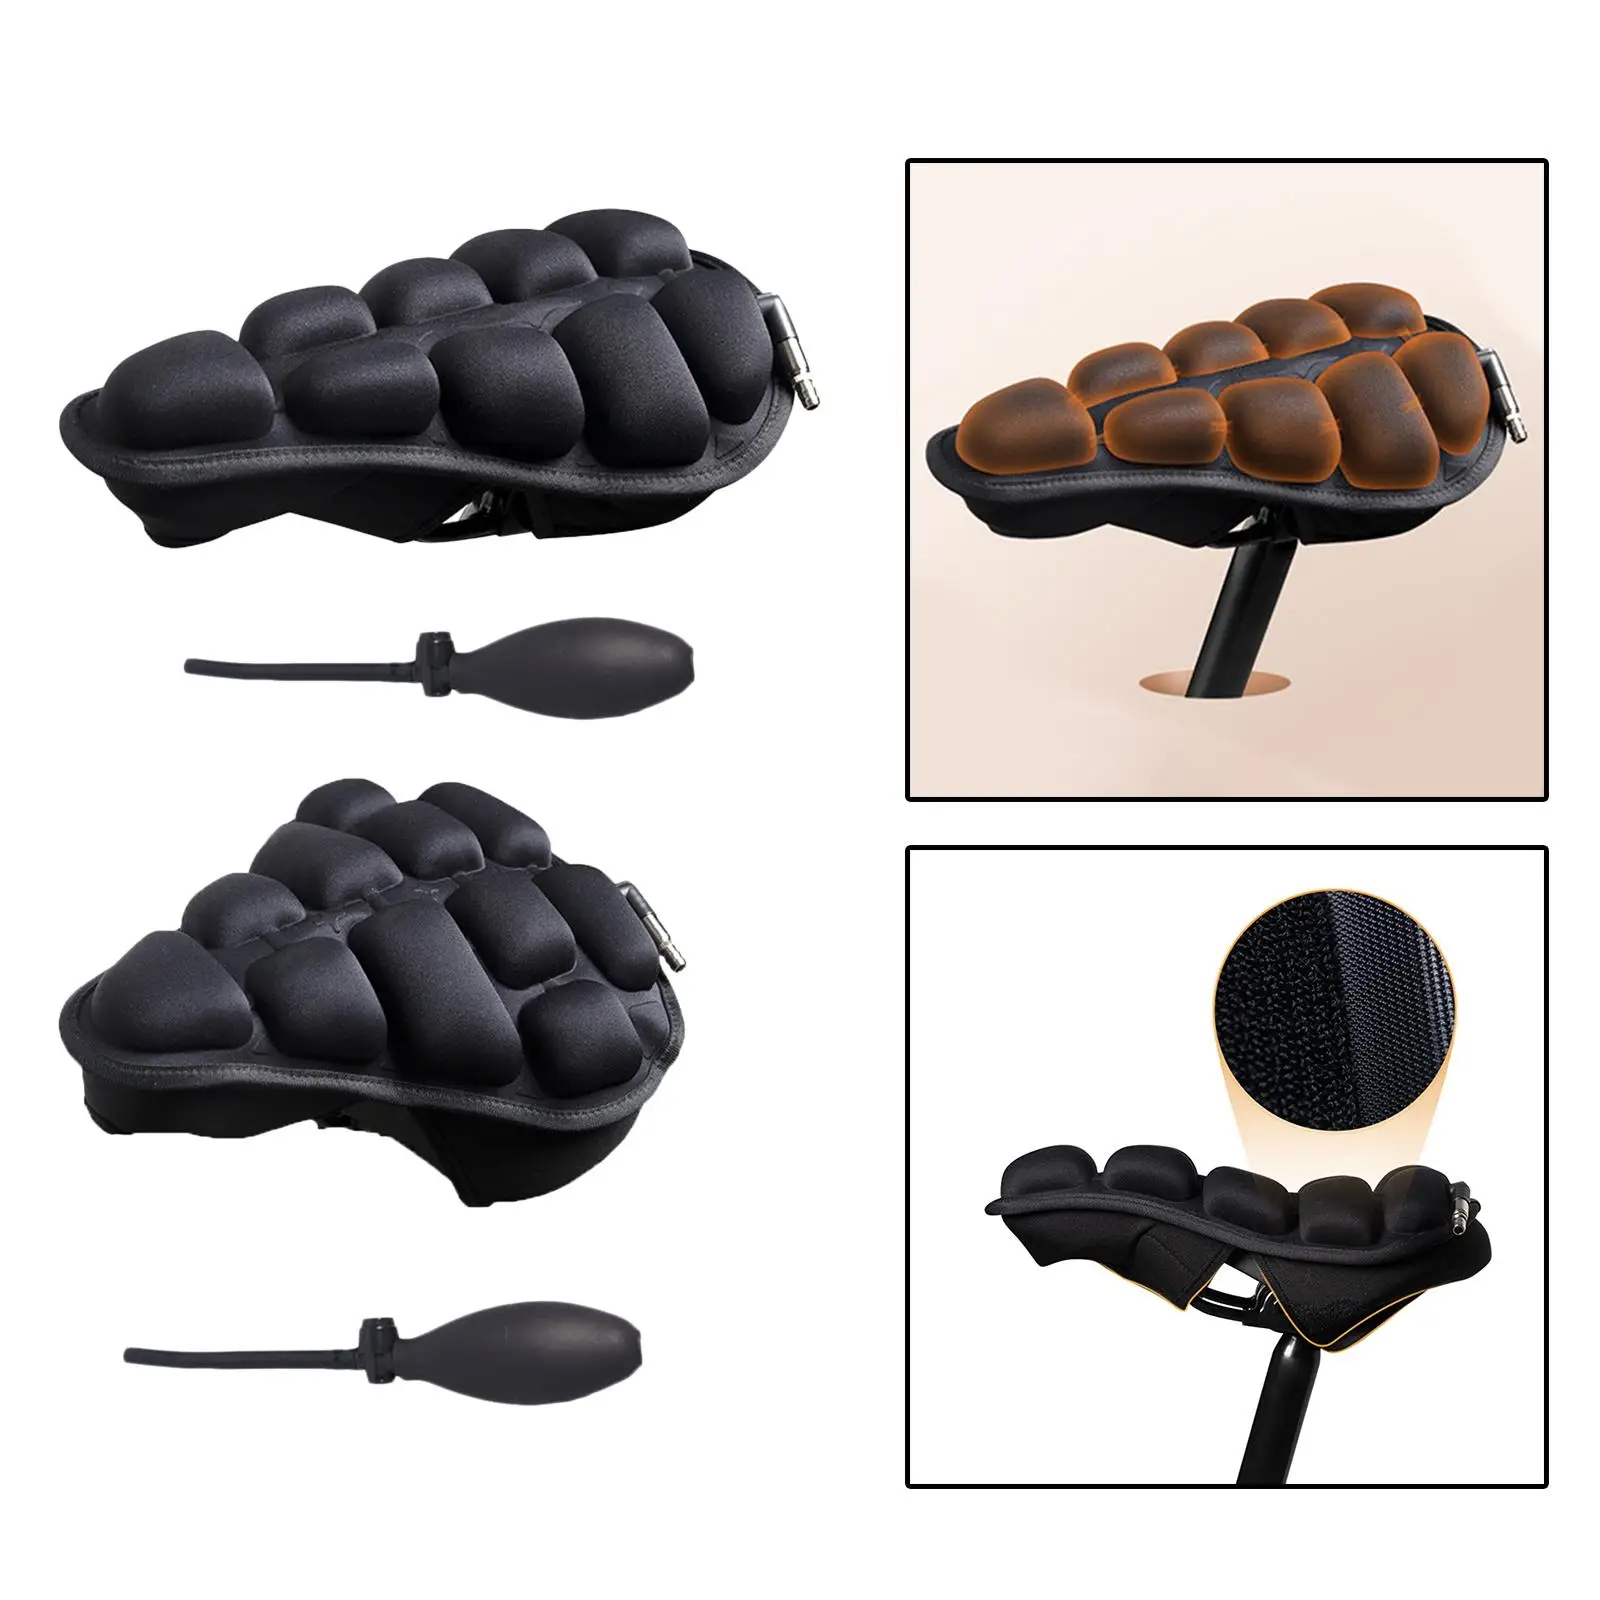 Comfort Bike Seat Cushion Cover, 3D Bike Saddle Cover, Breathable Inflatable